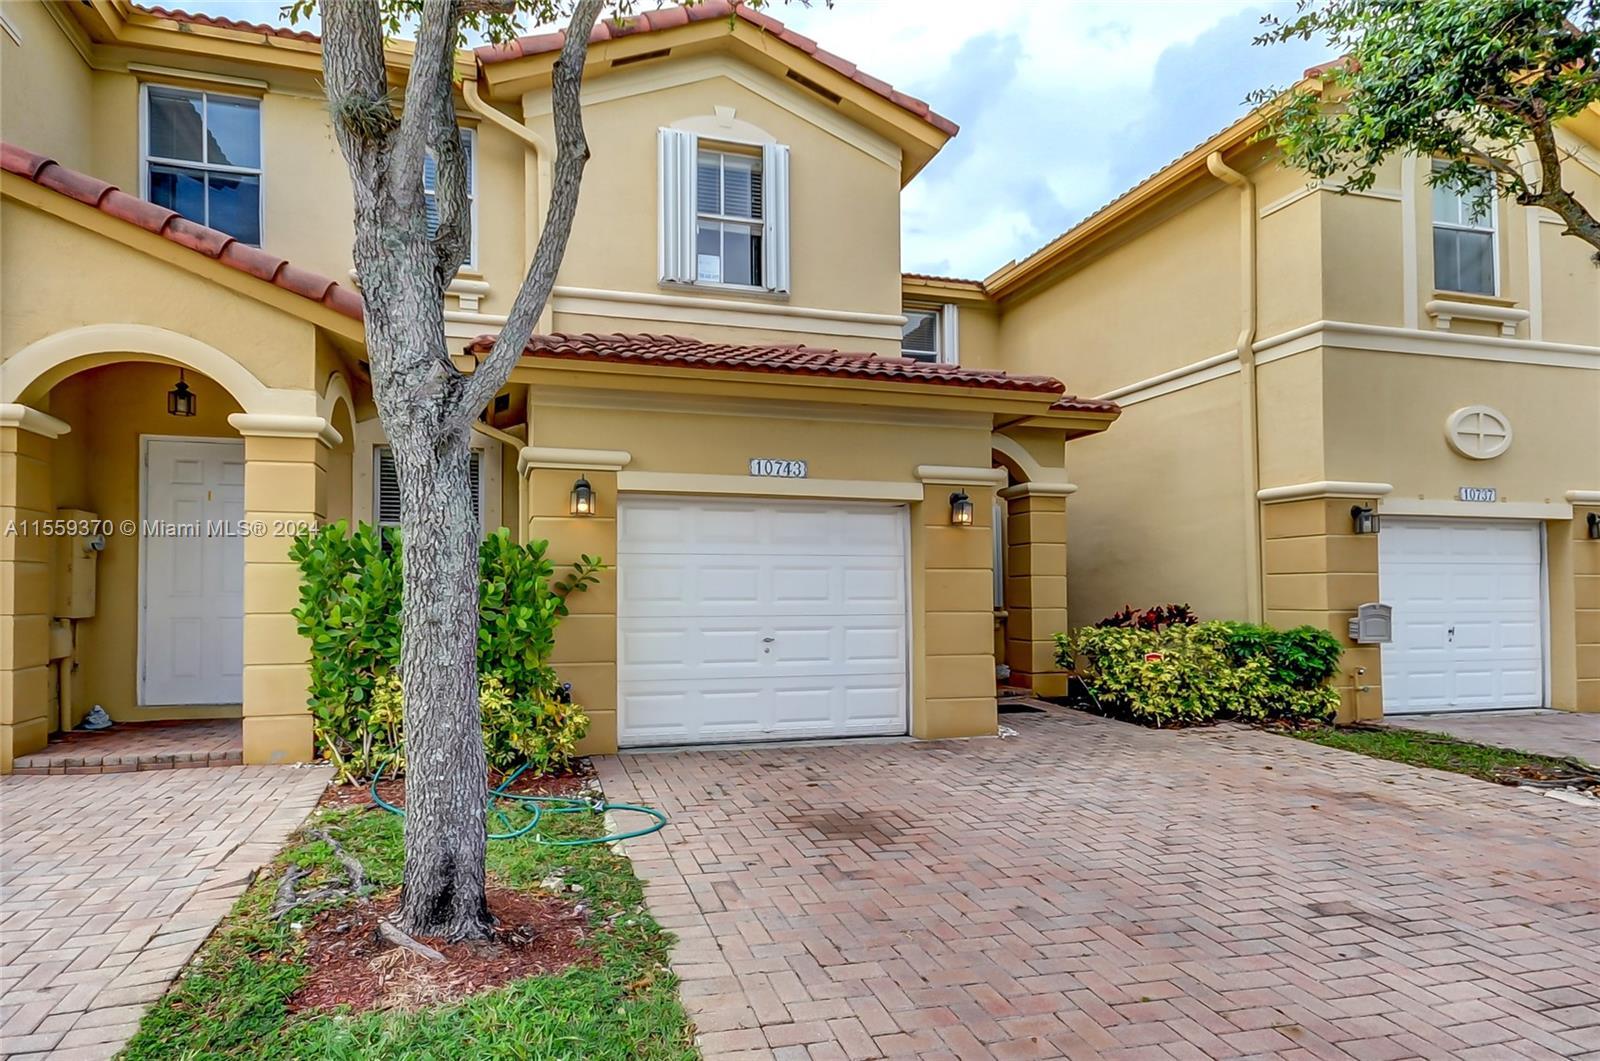 Enjoy living at Doral in a 3 Bedrooms and 2 complete Bathrooms with a Half Bath downstair. The prope